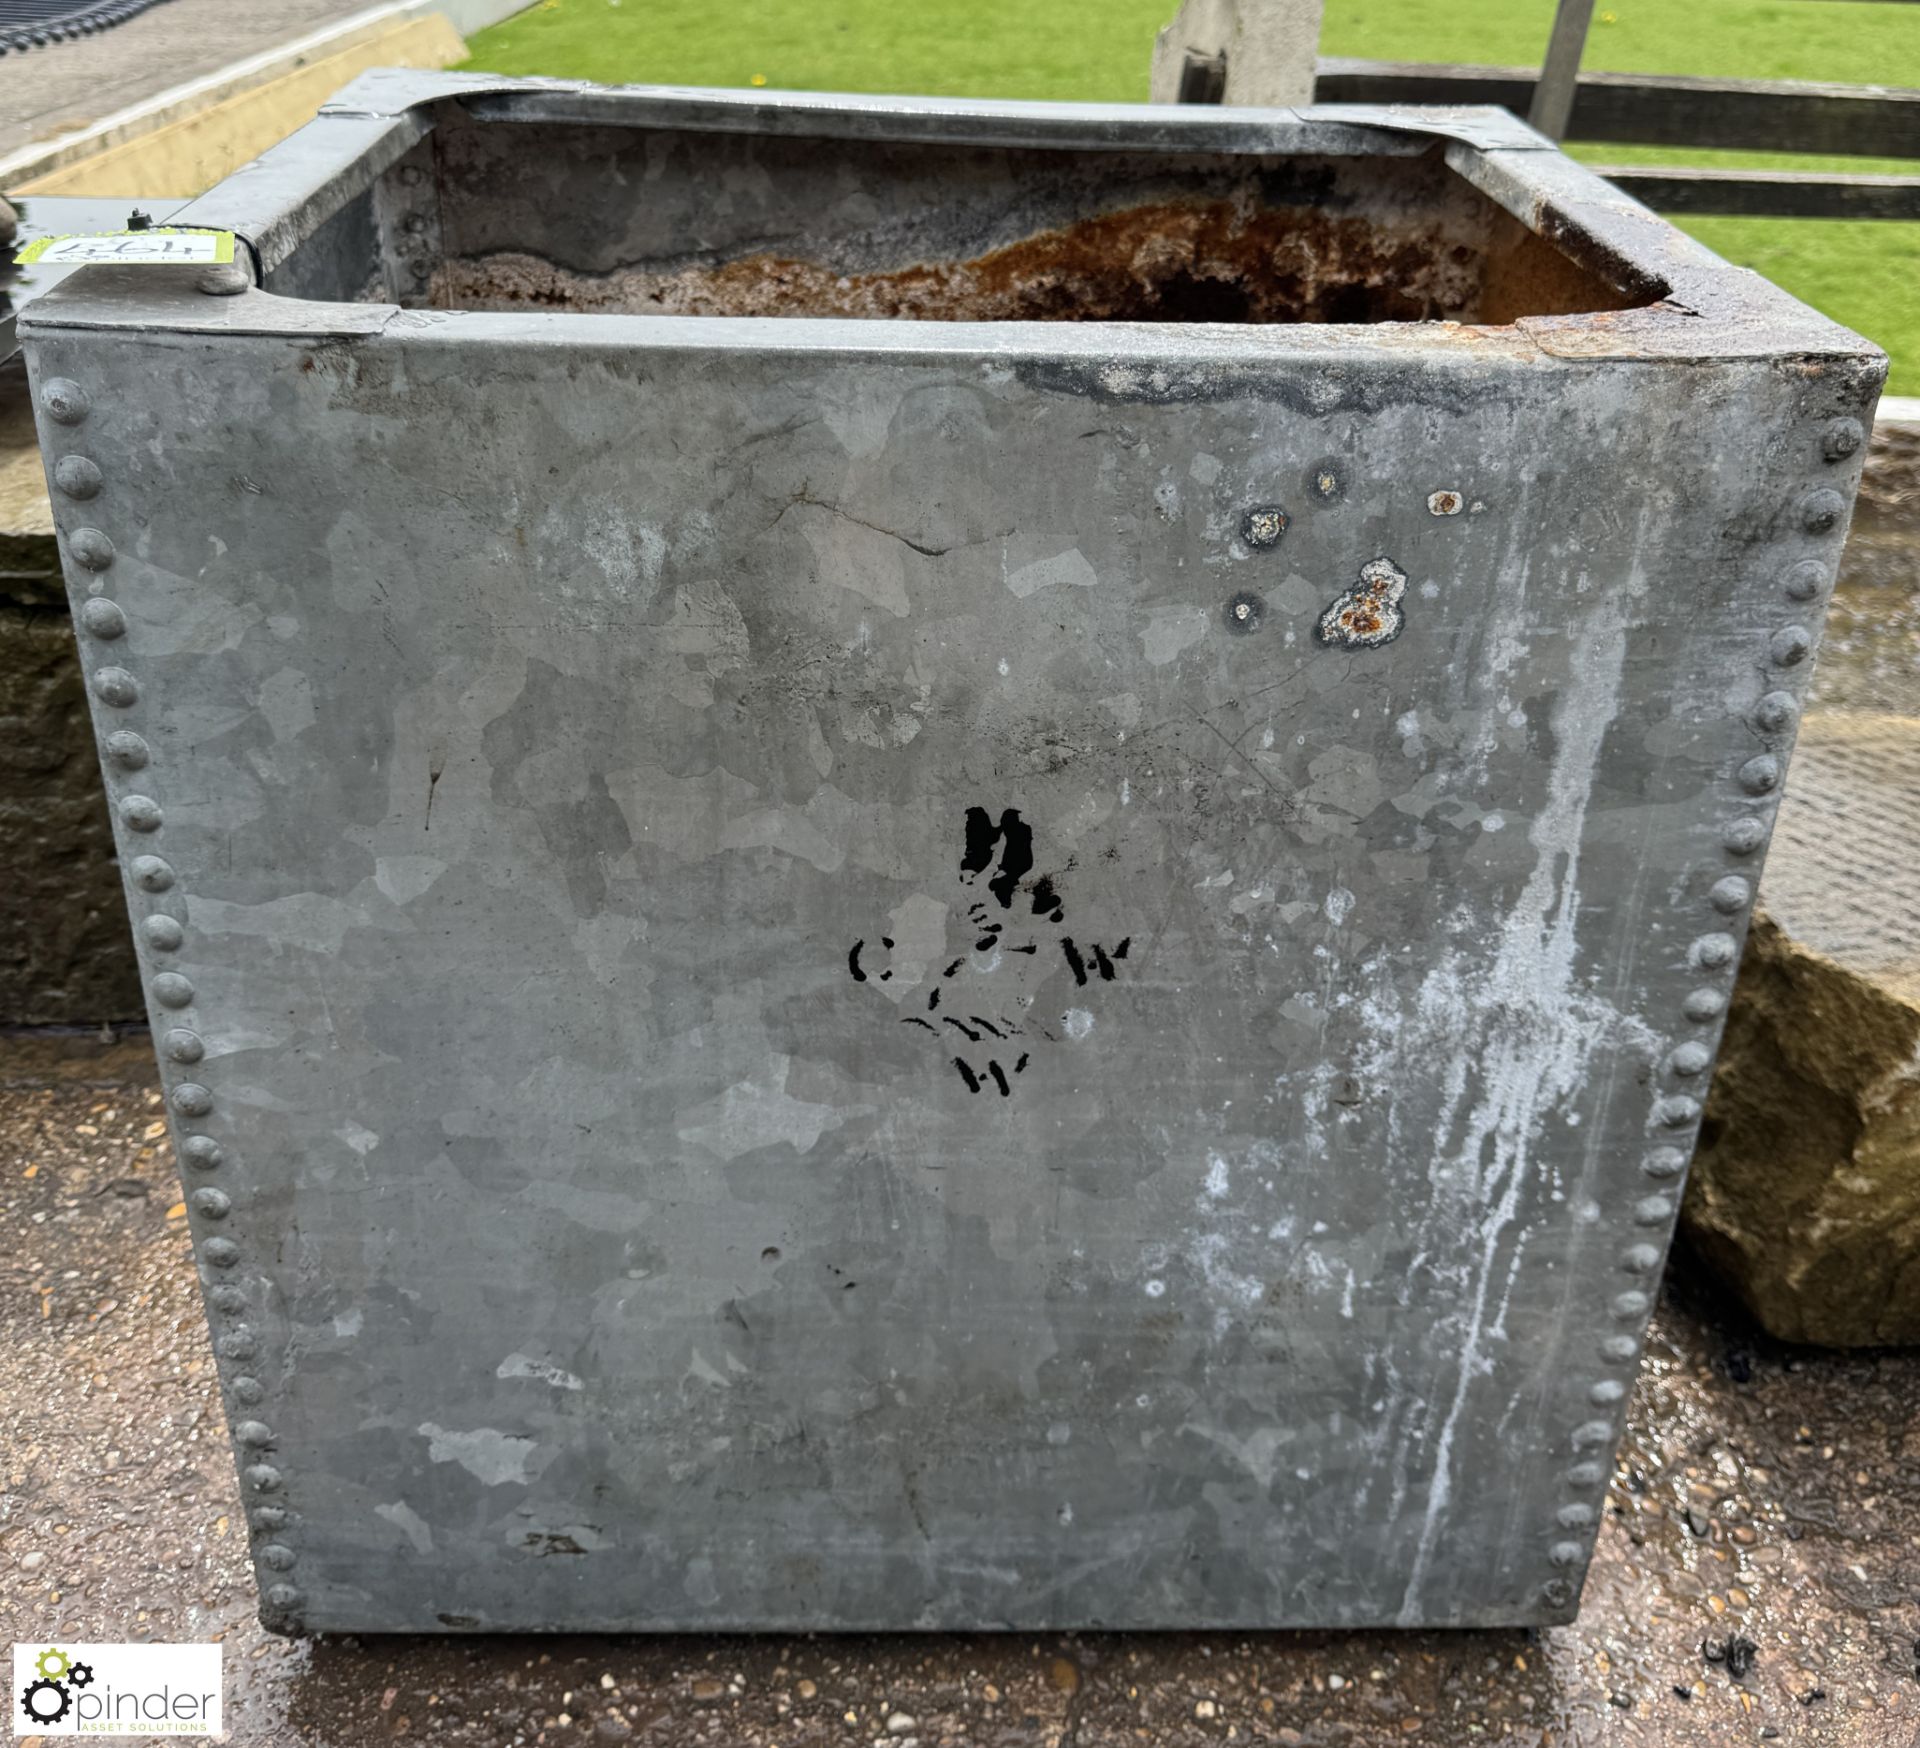 A metal galvanised riveted Water Cistern, approx. 24in x 24in x 18in, circa 1920 to 1940s